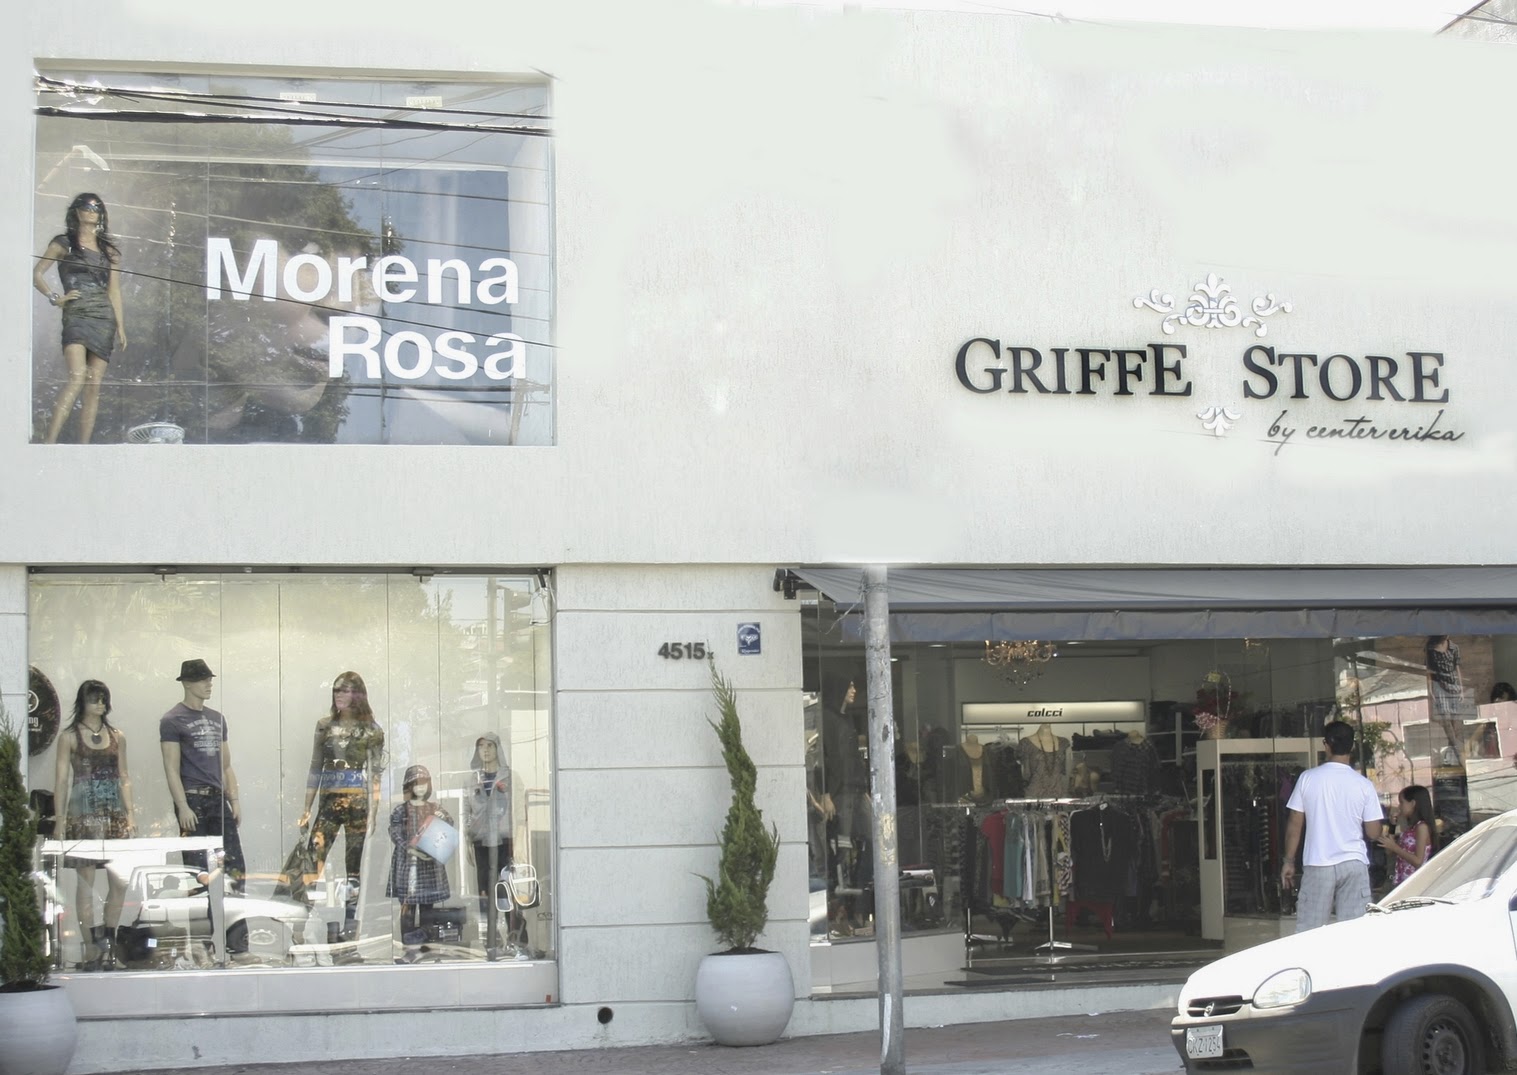 Griffe Store by centererika